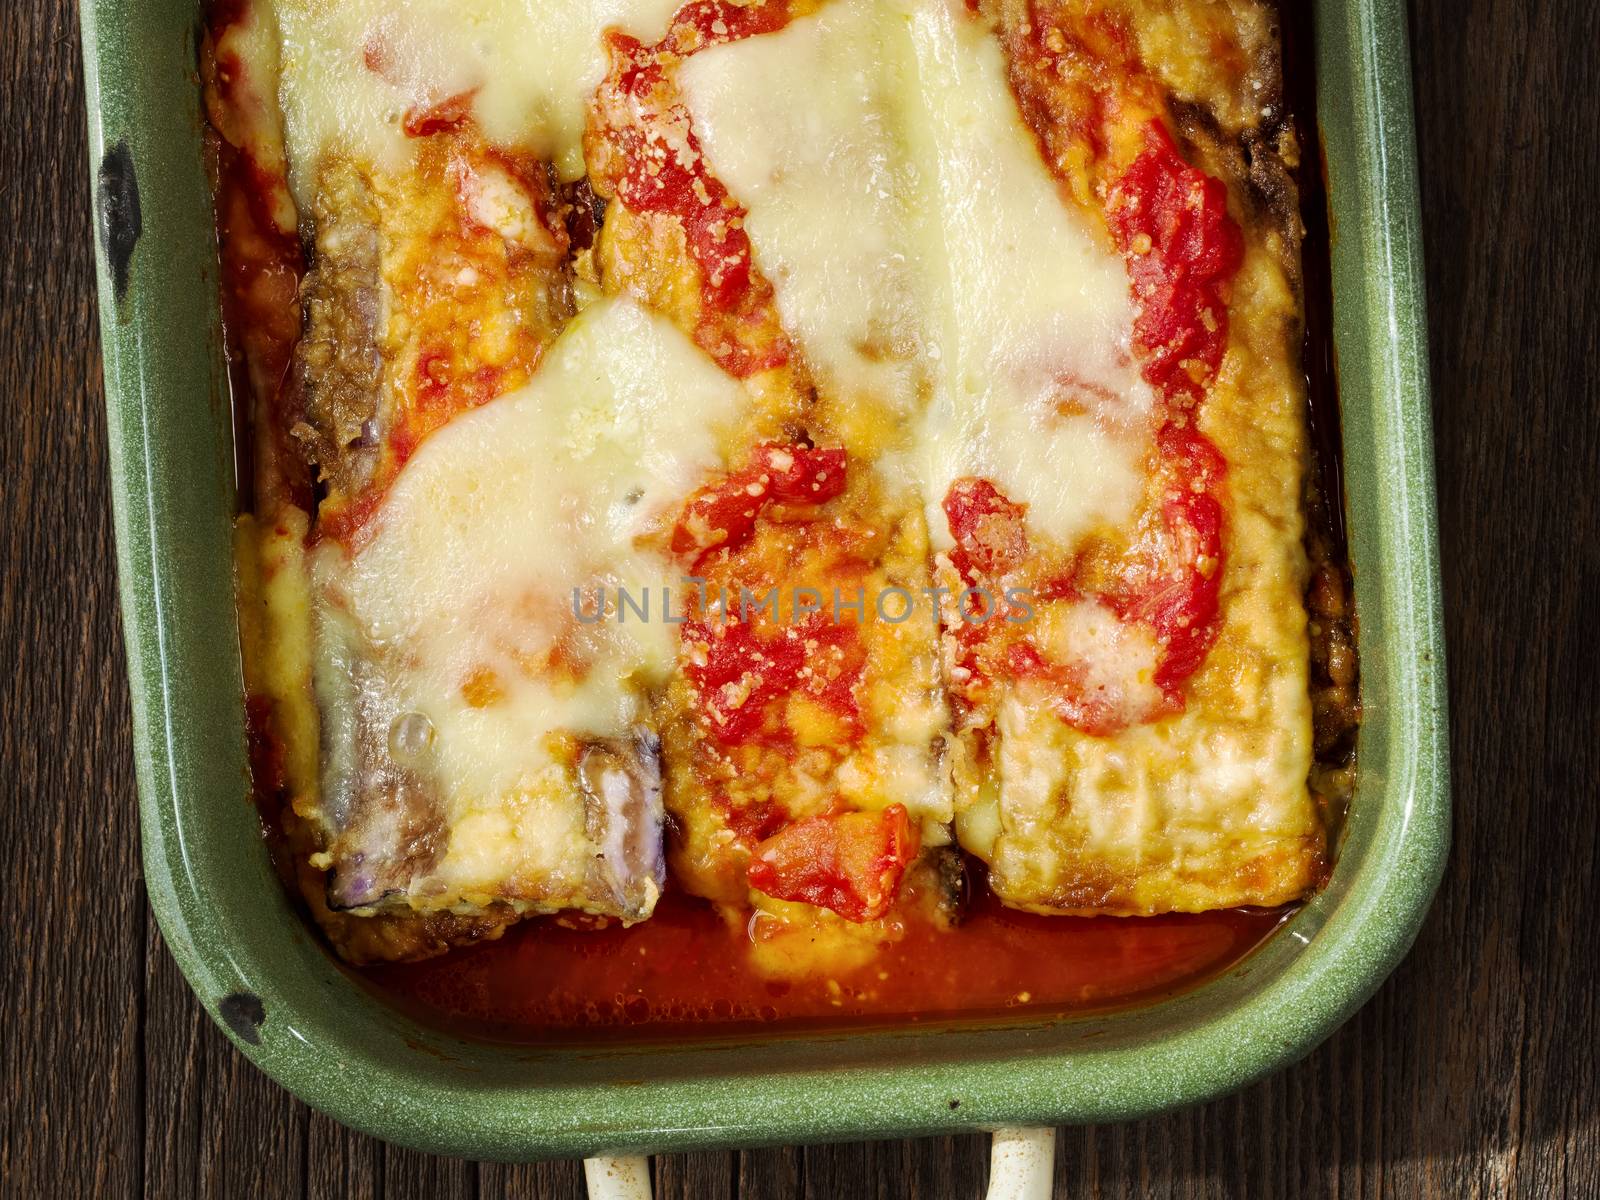 rustic traditional italian eggplant parmesan by zkruger